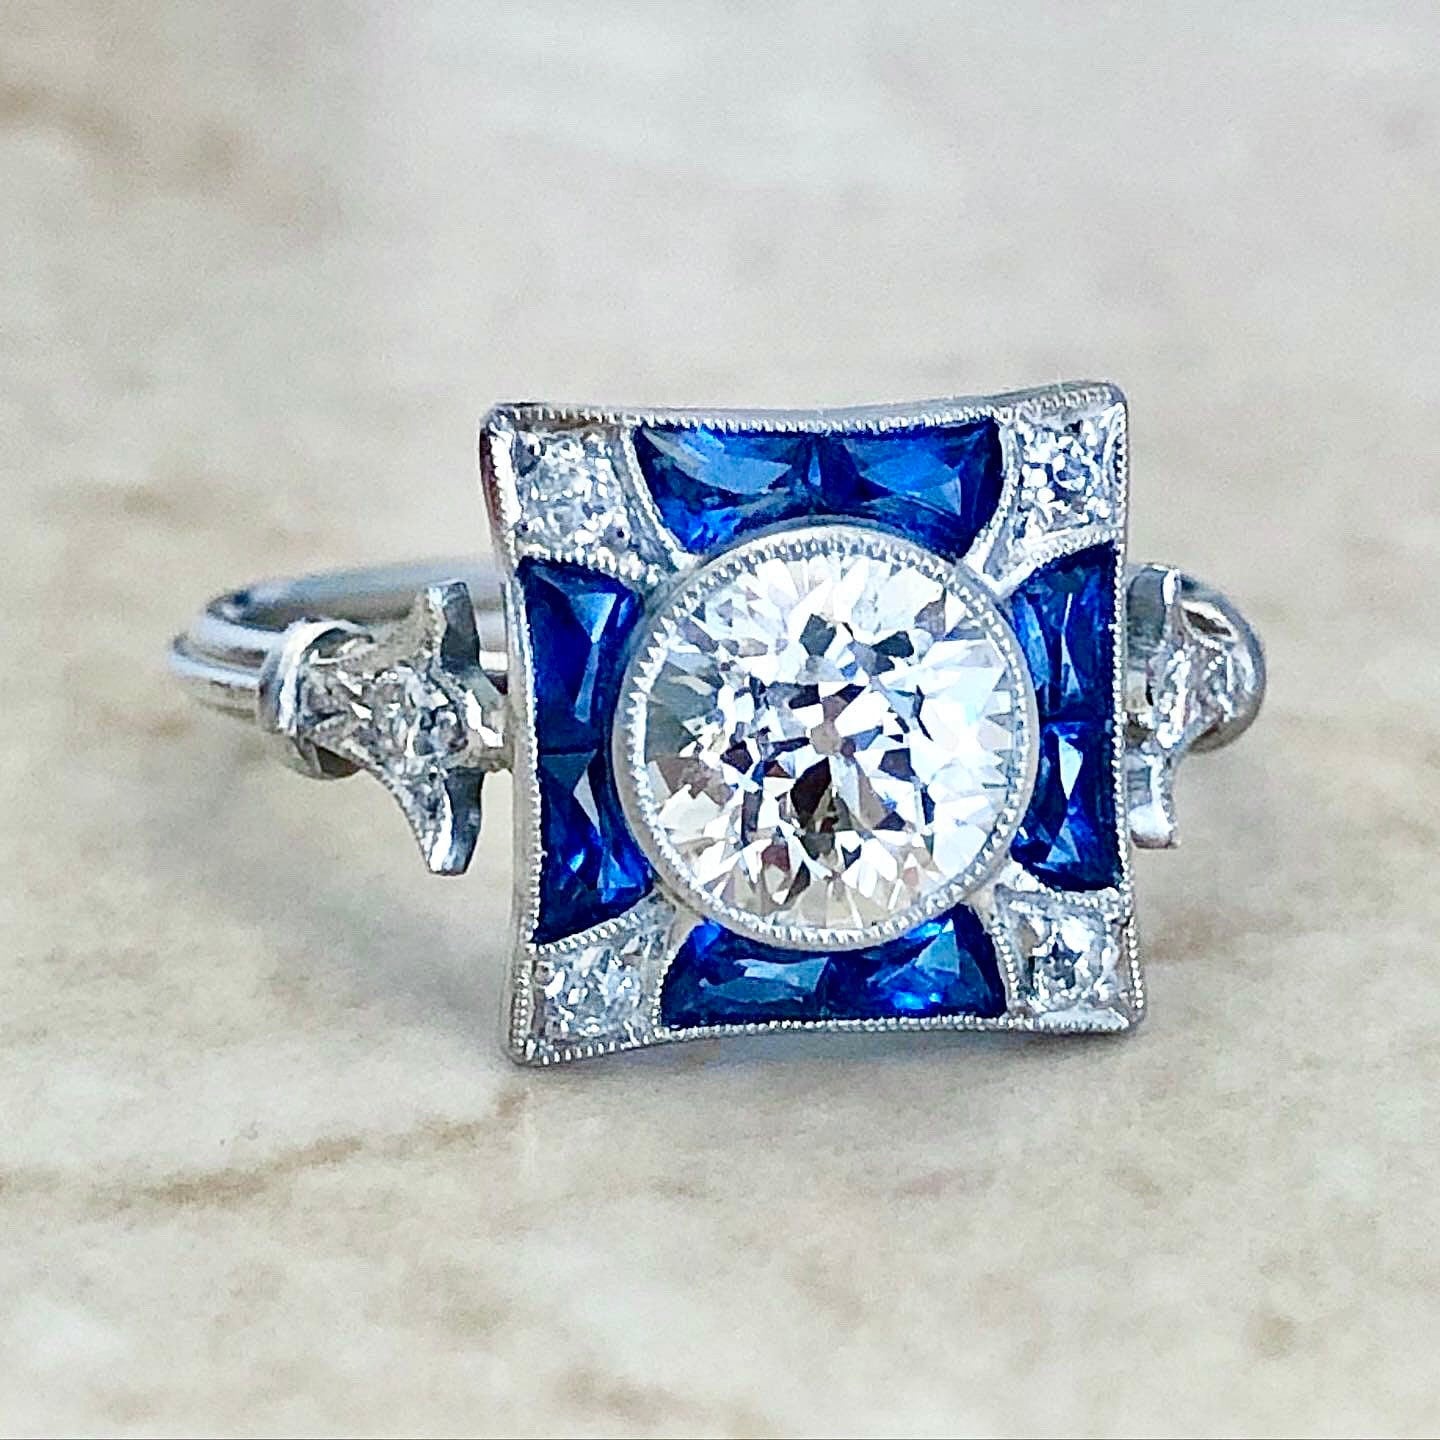 Very Fine Handcrafted Platinum Art Deco Style Diamond & Sapphire Engagement Ring - Cocktail Ring - Promise Ring - Maltese Cross Ring